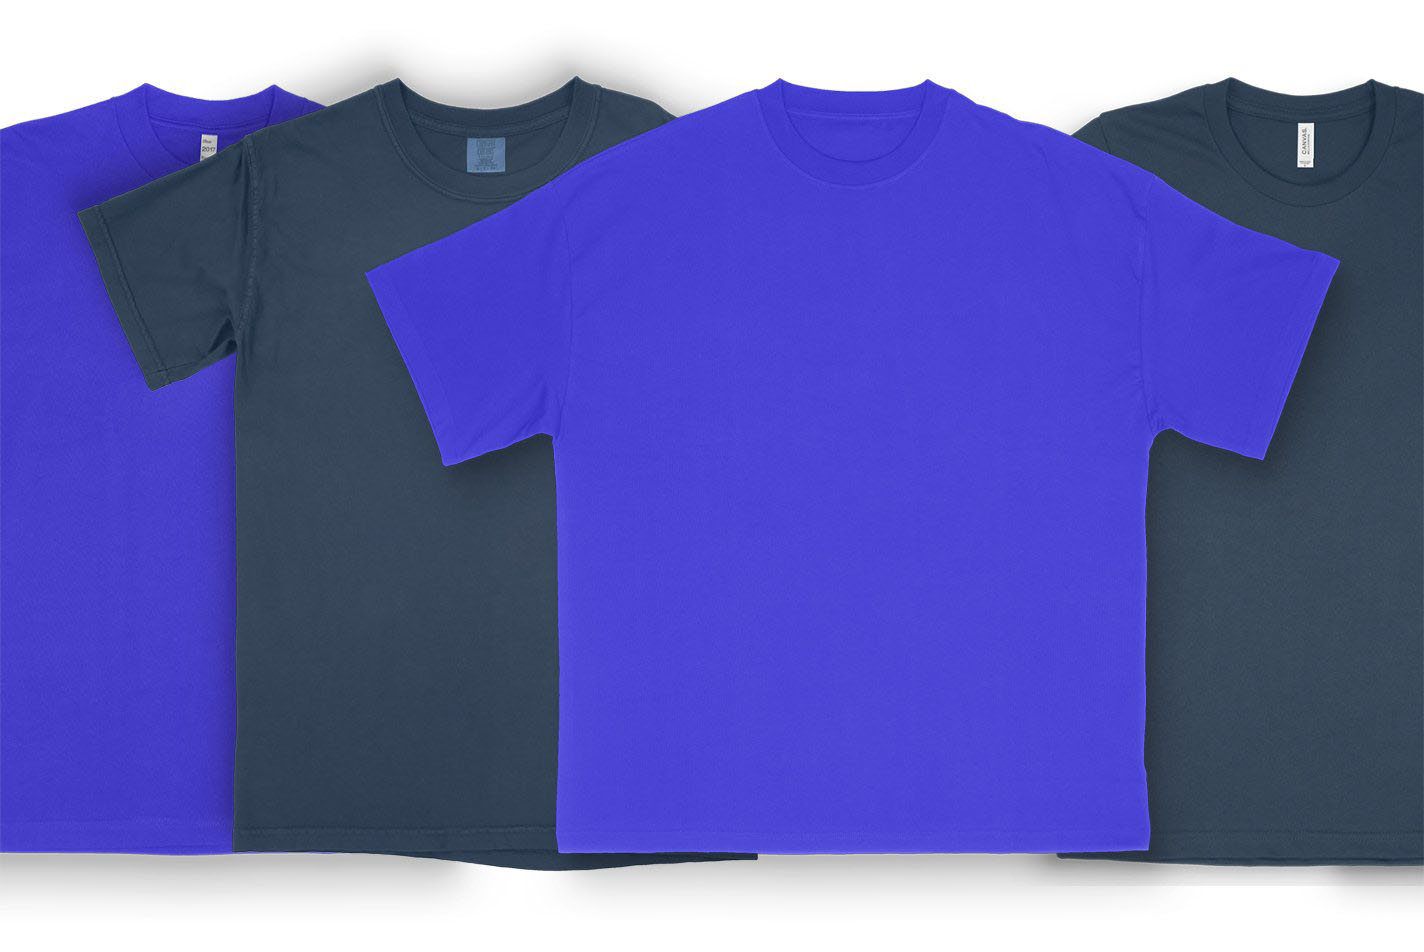 The Top 5 Best Blanks for T-Shirt Printing